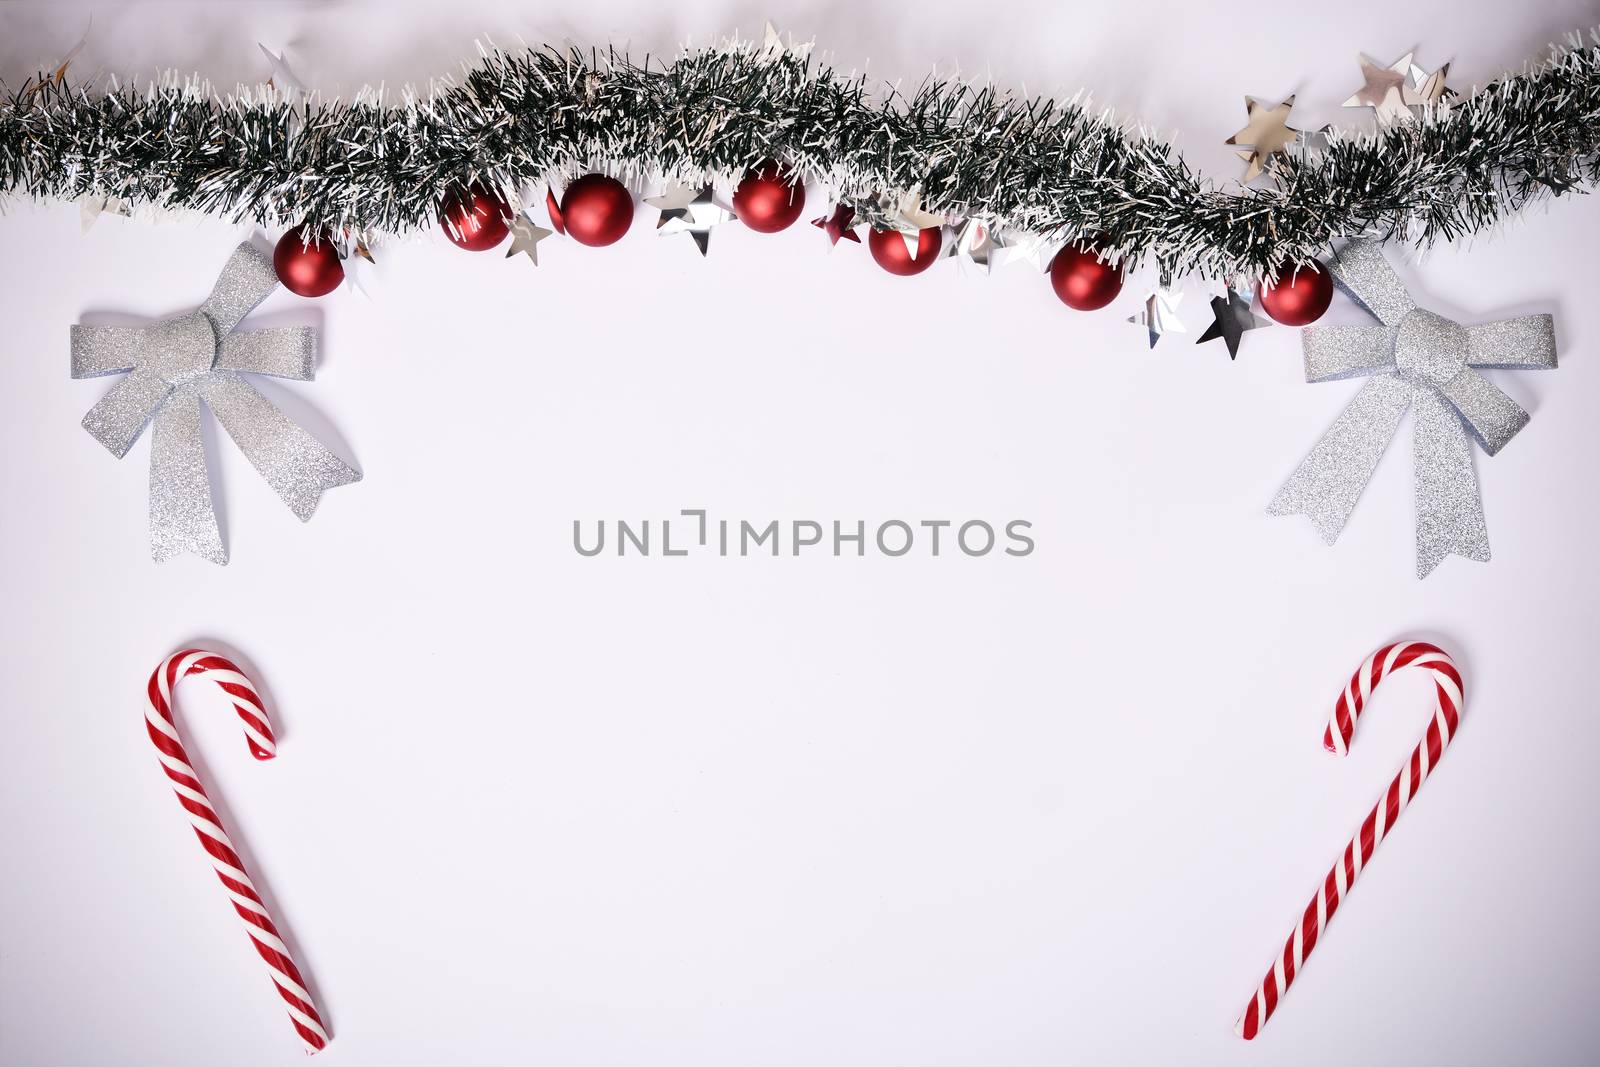 Christmas composition. Garland with red balls, stars, glittery bows and candy canes on white background. Christmas, winter, new year concept. Flat lay, top view, copy space.